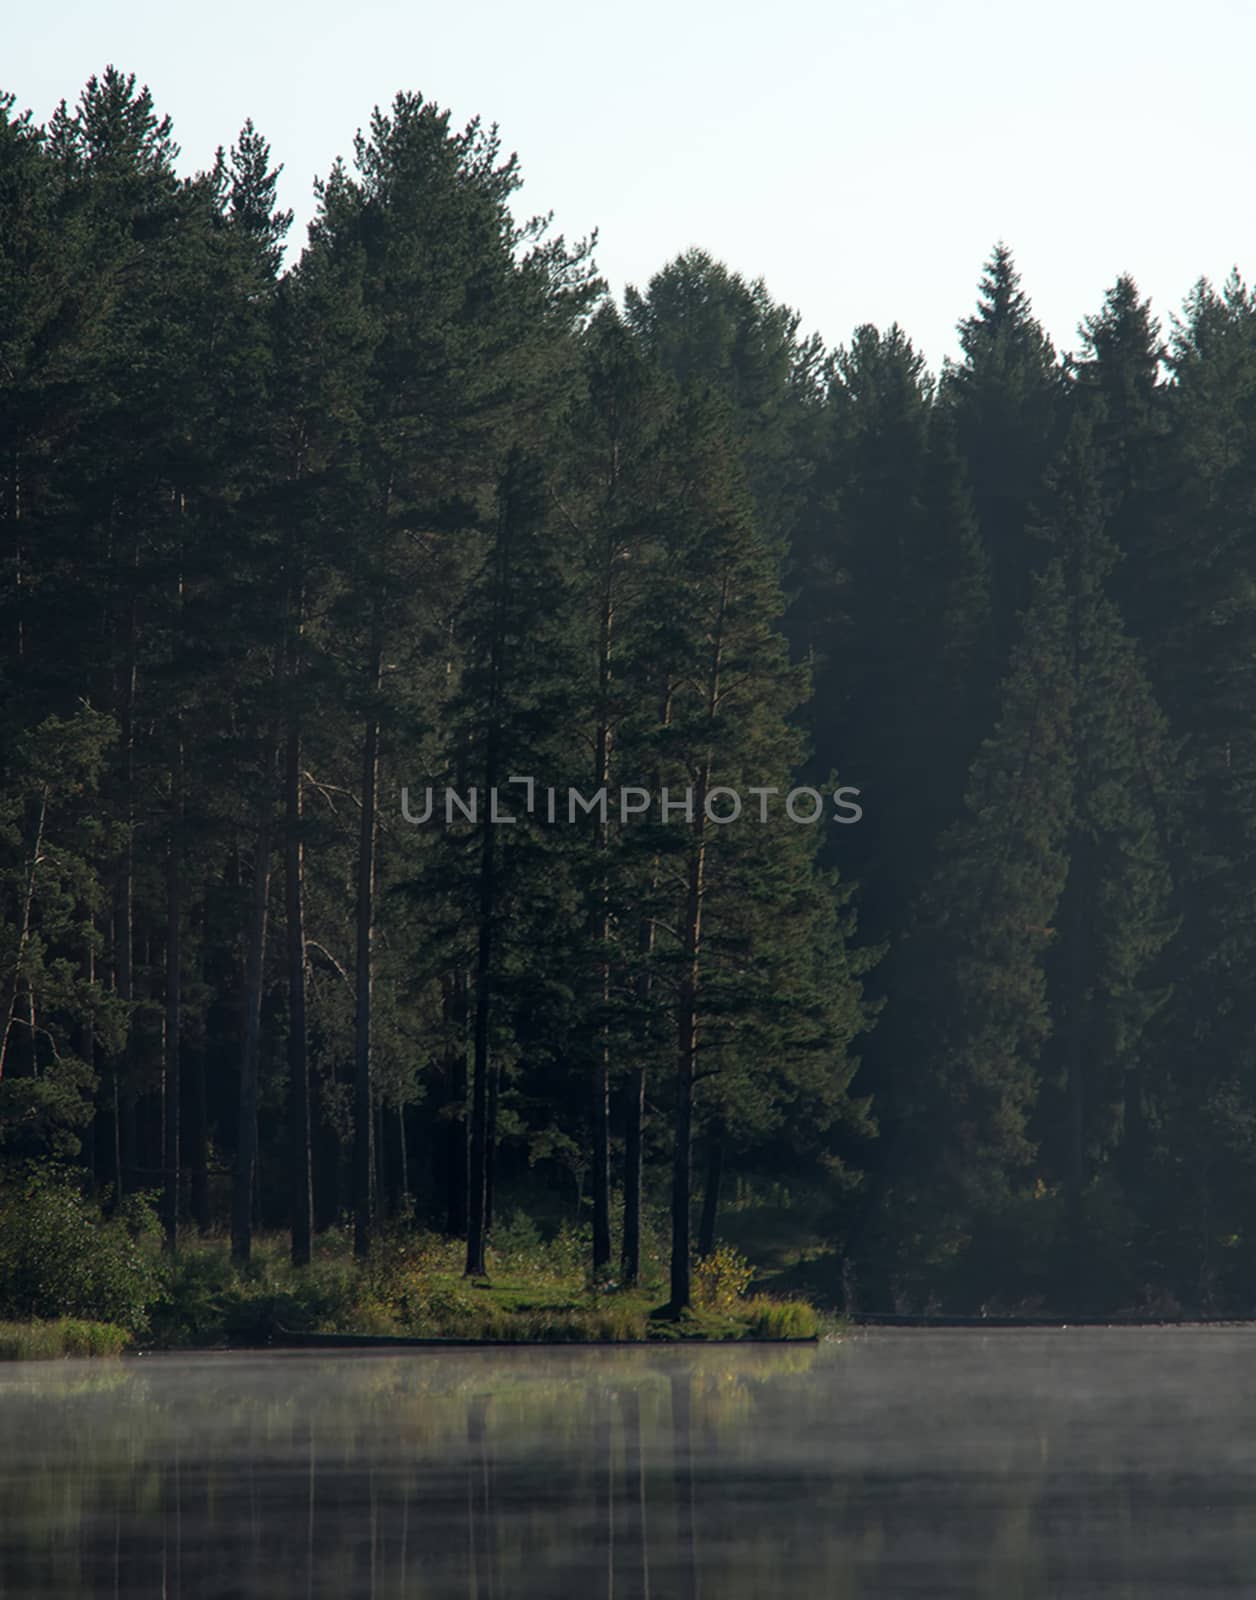 Water near forest. Reflecting trees in the water. by DePo